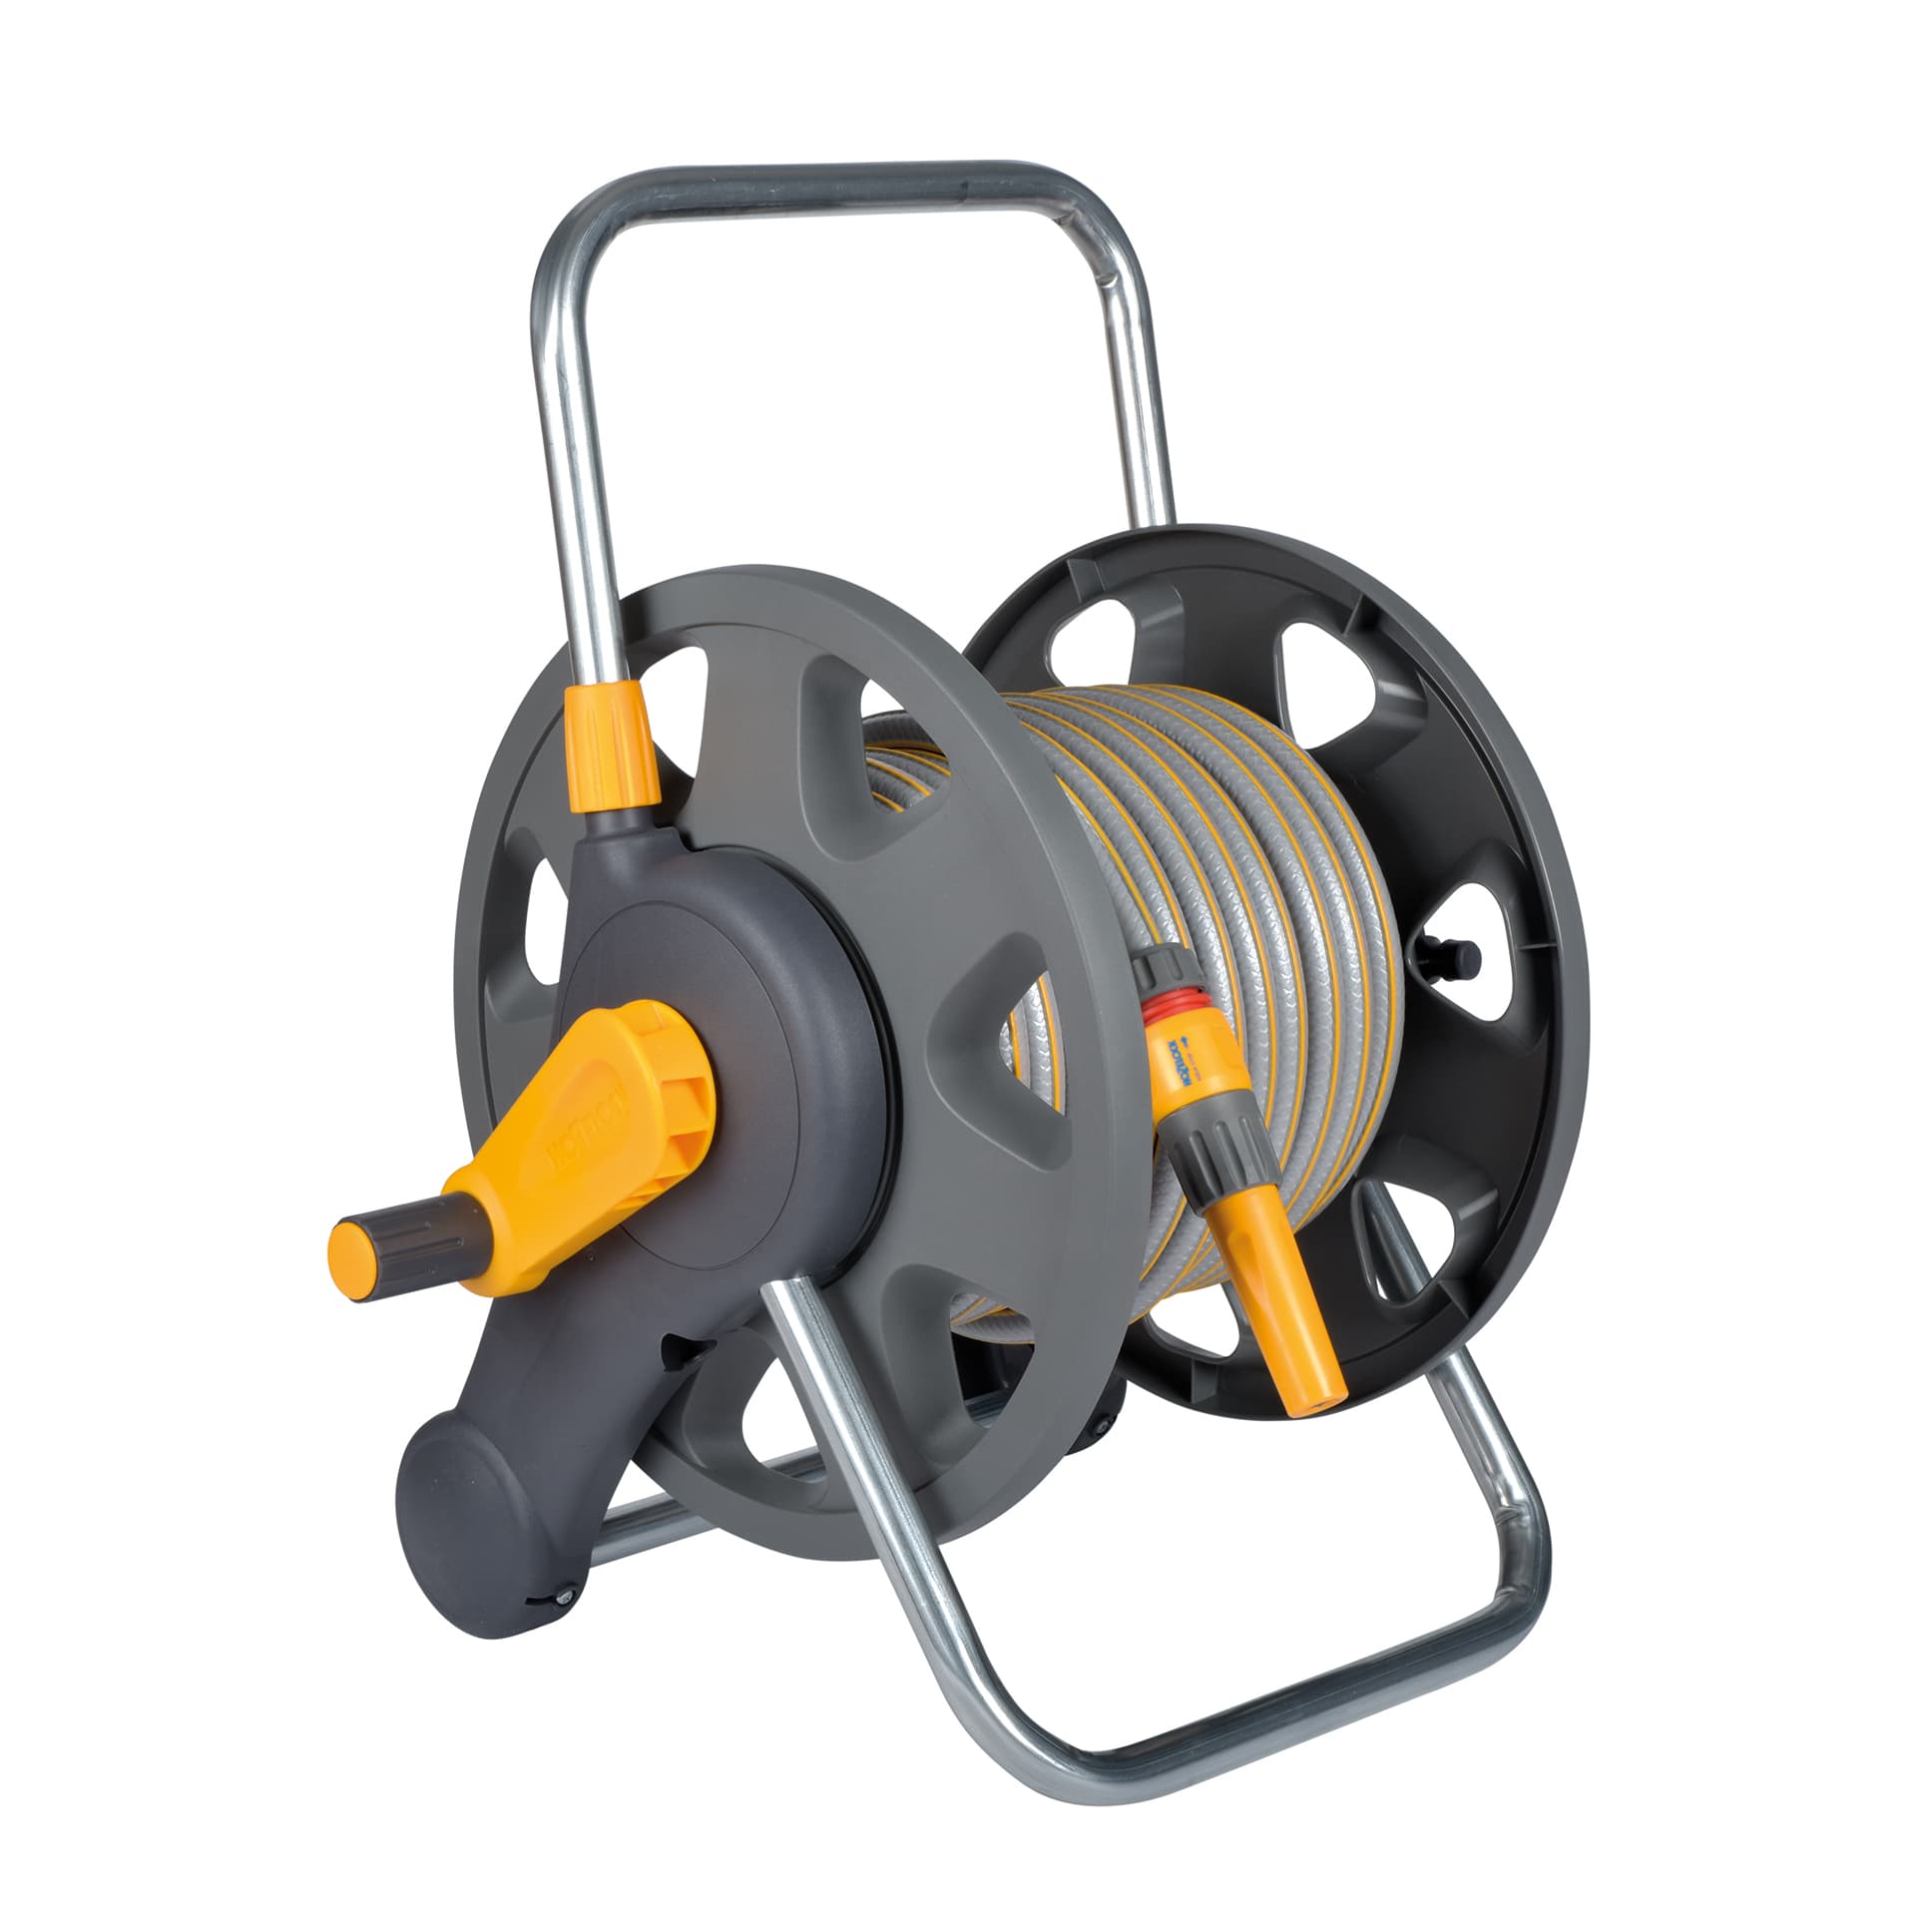 Assembled 2-in-1 Hose Reel (45m) With Hose